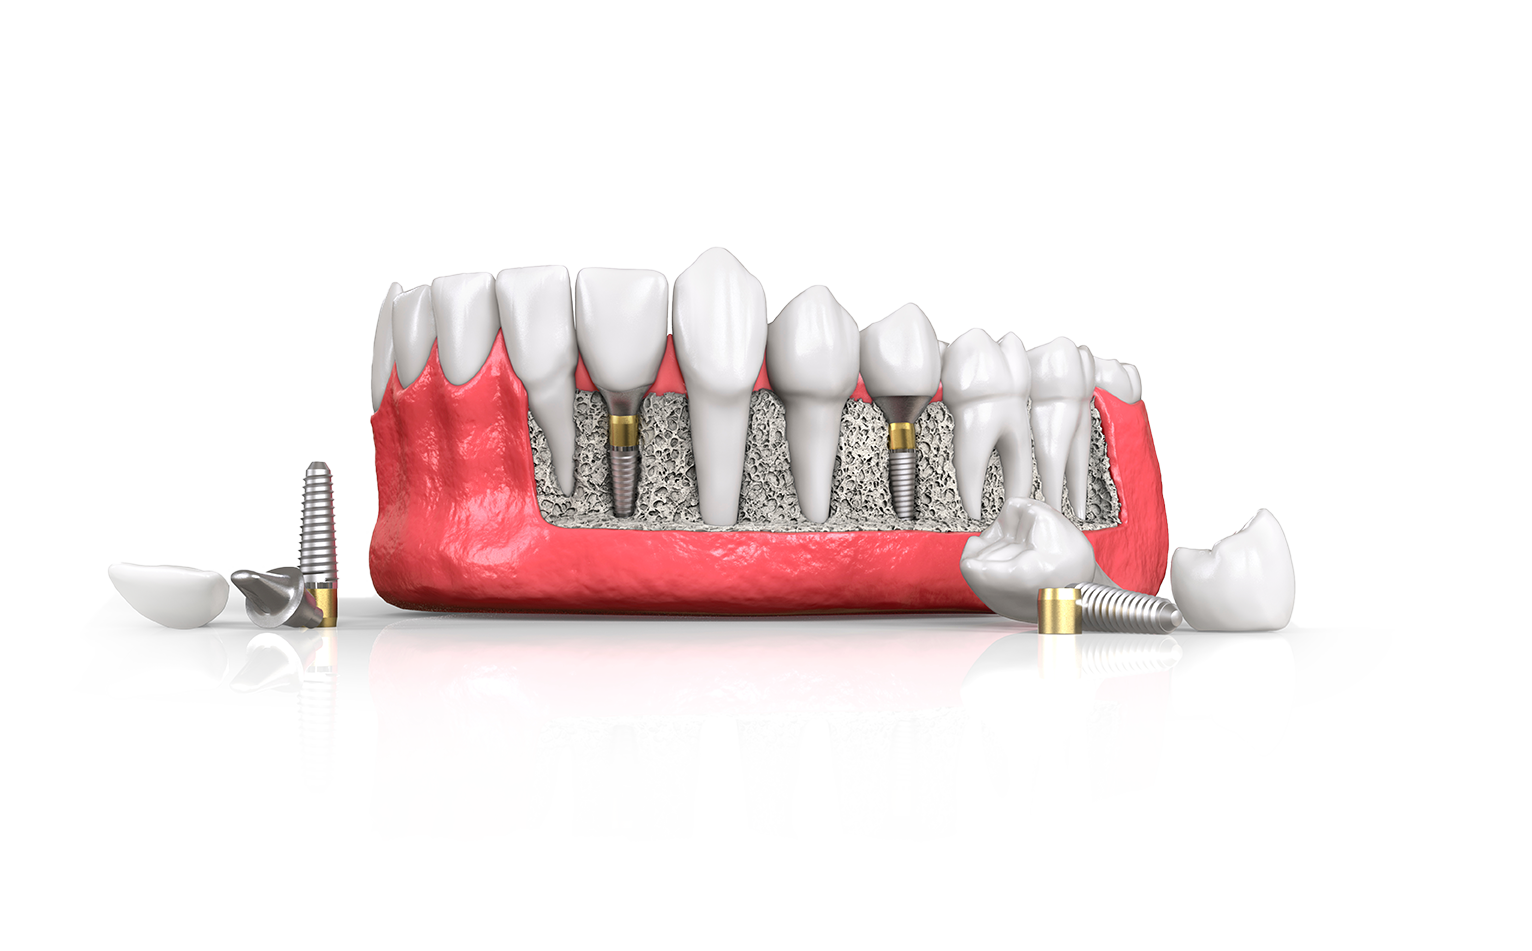 A tooth model showing bone graft a patient smiling after gum recession treatment chattanooga tn chattanooga periodontics dental implants